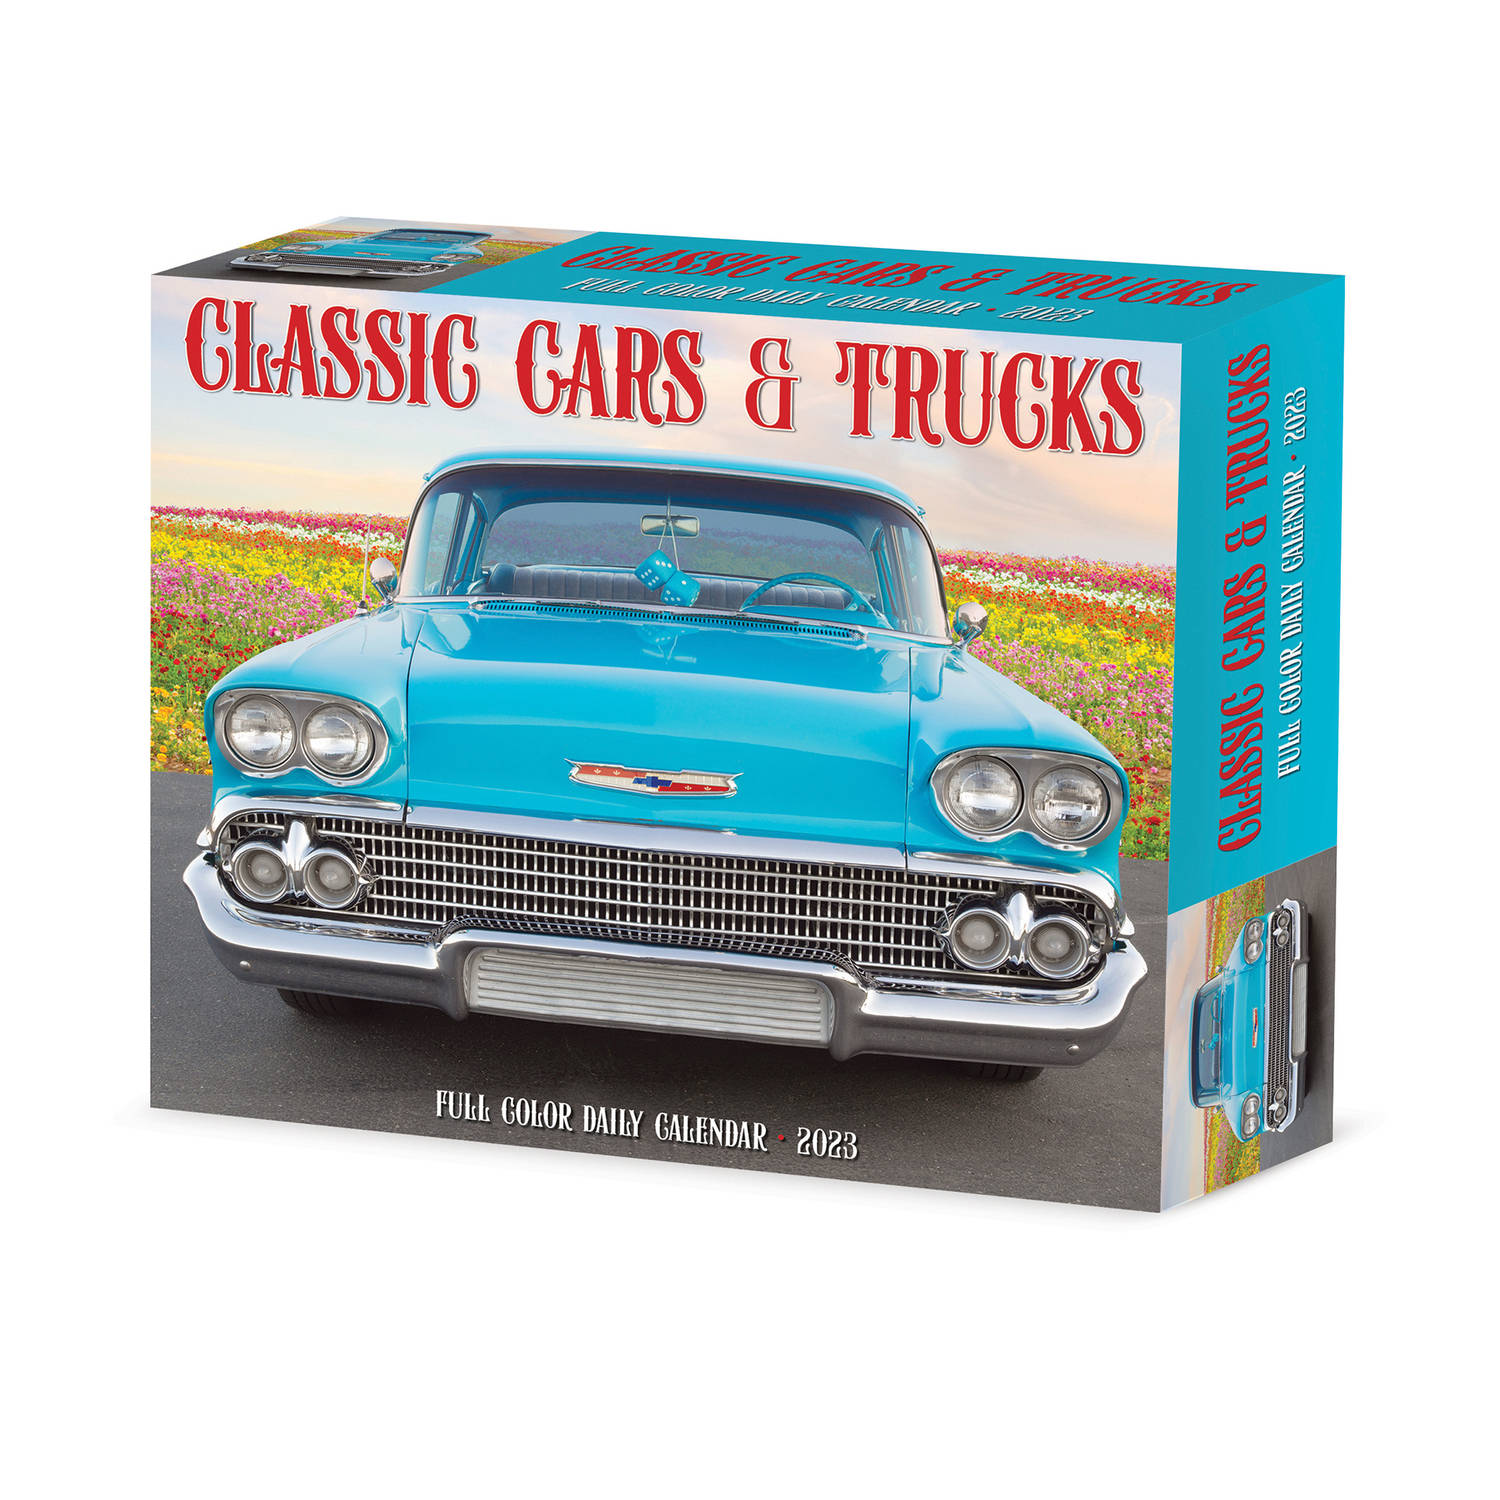 Classic Cars And Trucks Kalender 2023 Boxed